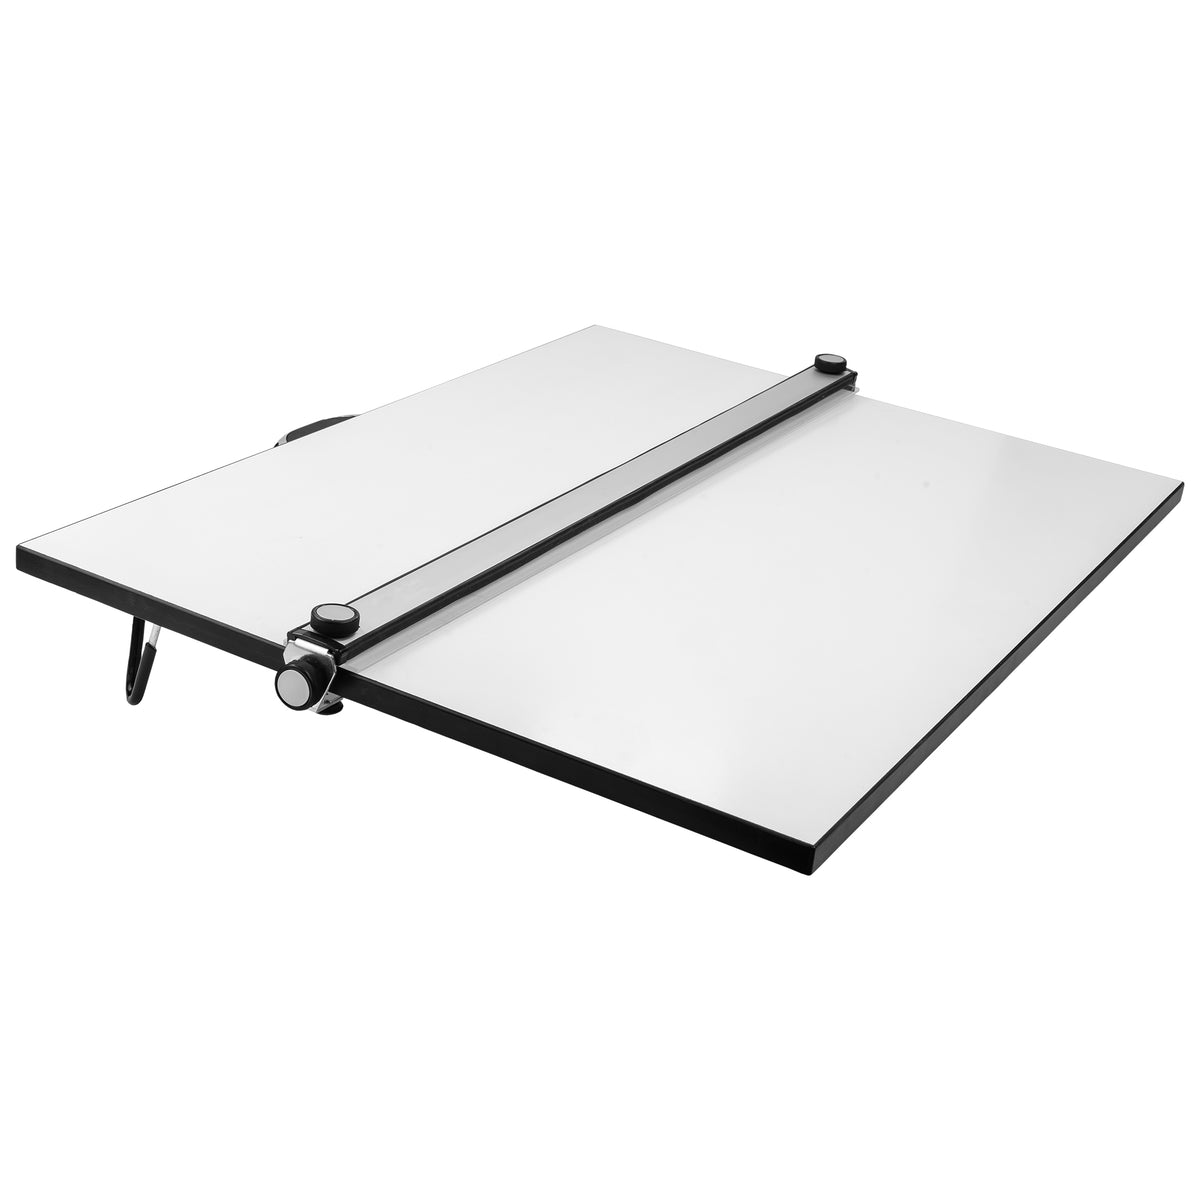 Pacific Arc, Table Top Drawing Board with Parallel Bar, White, 16 inches by 21 inches